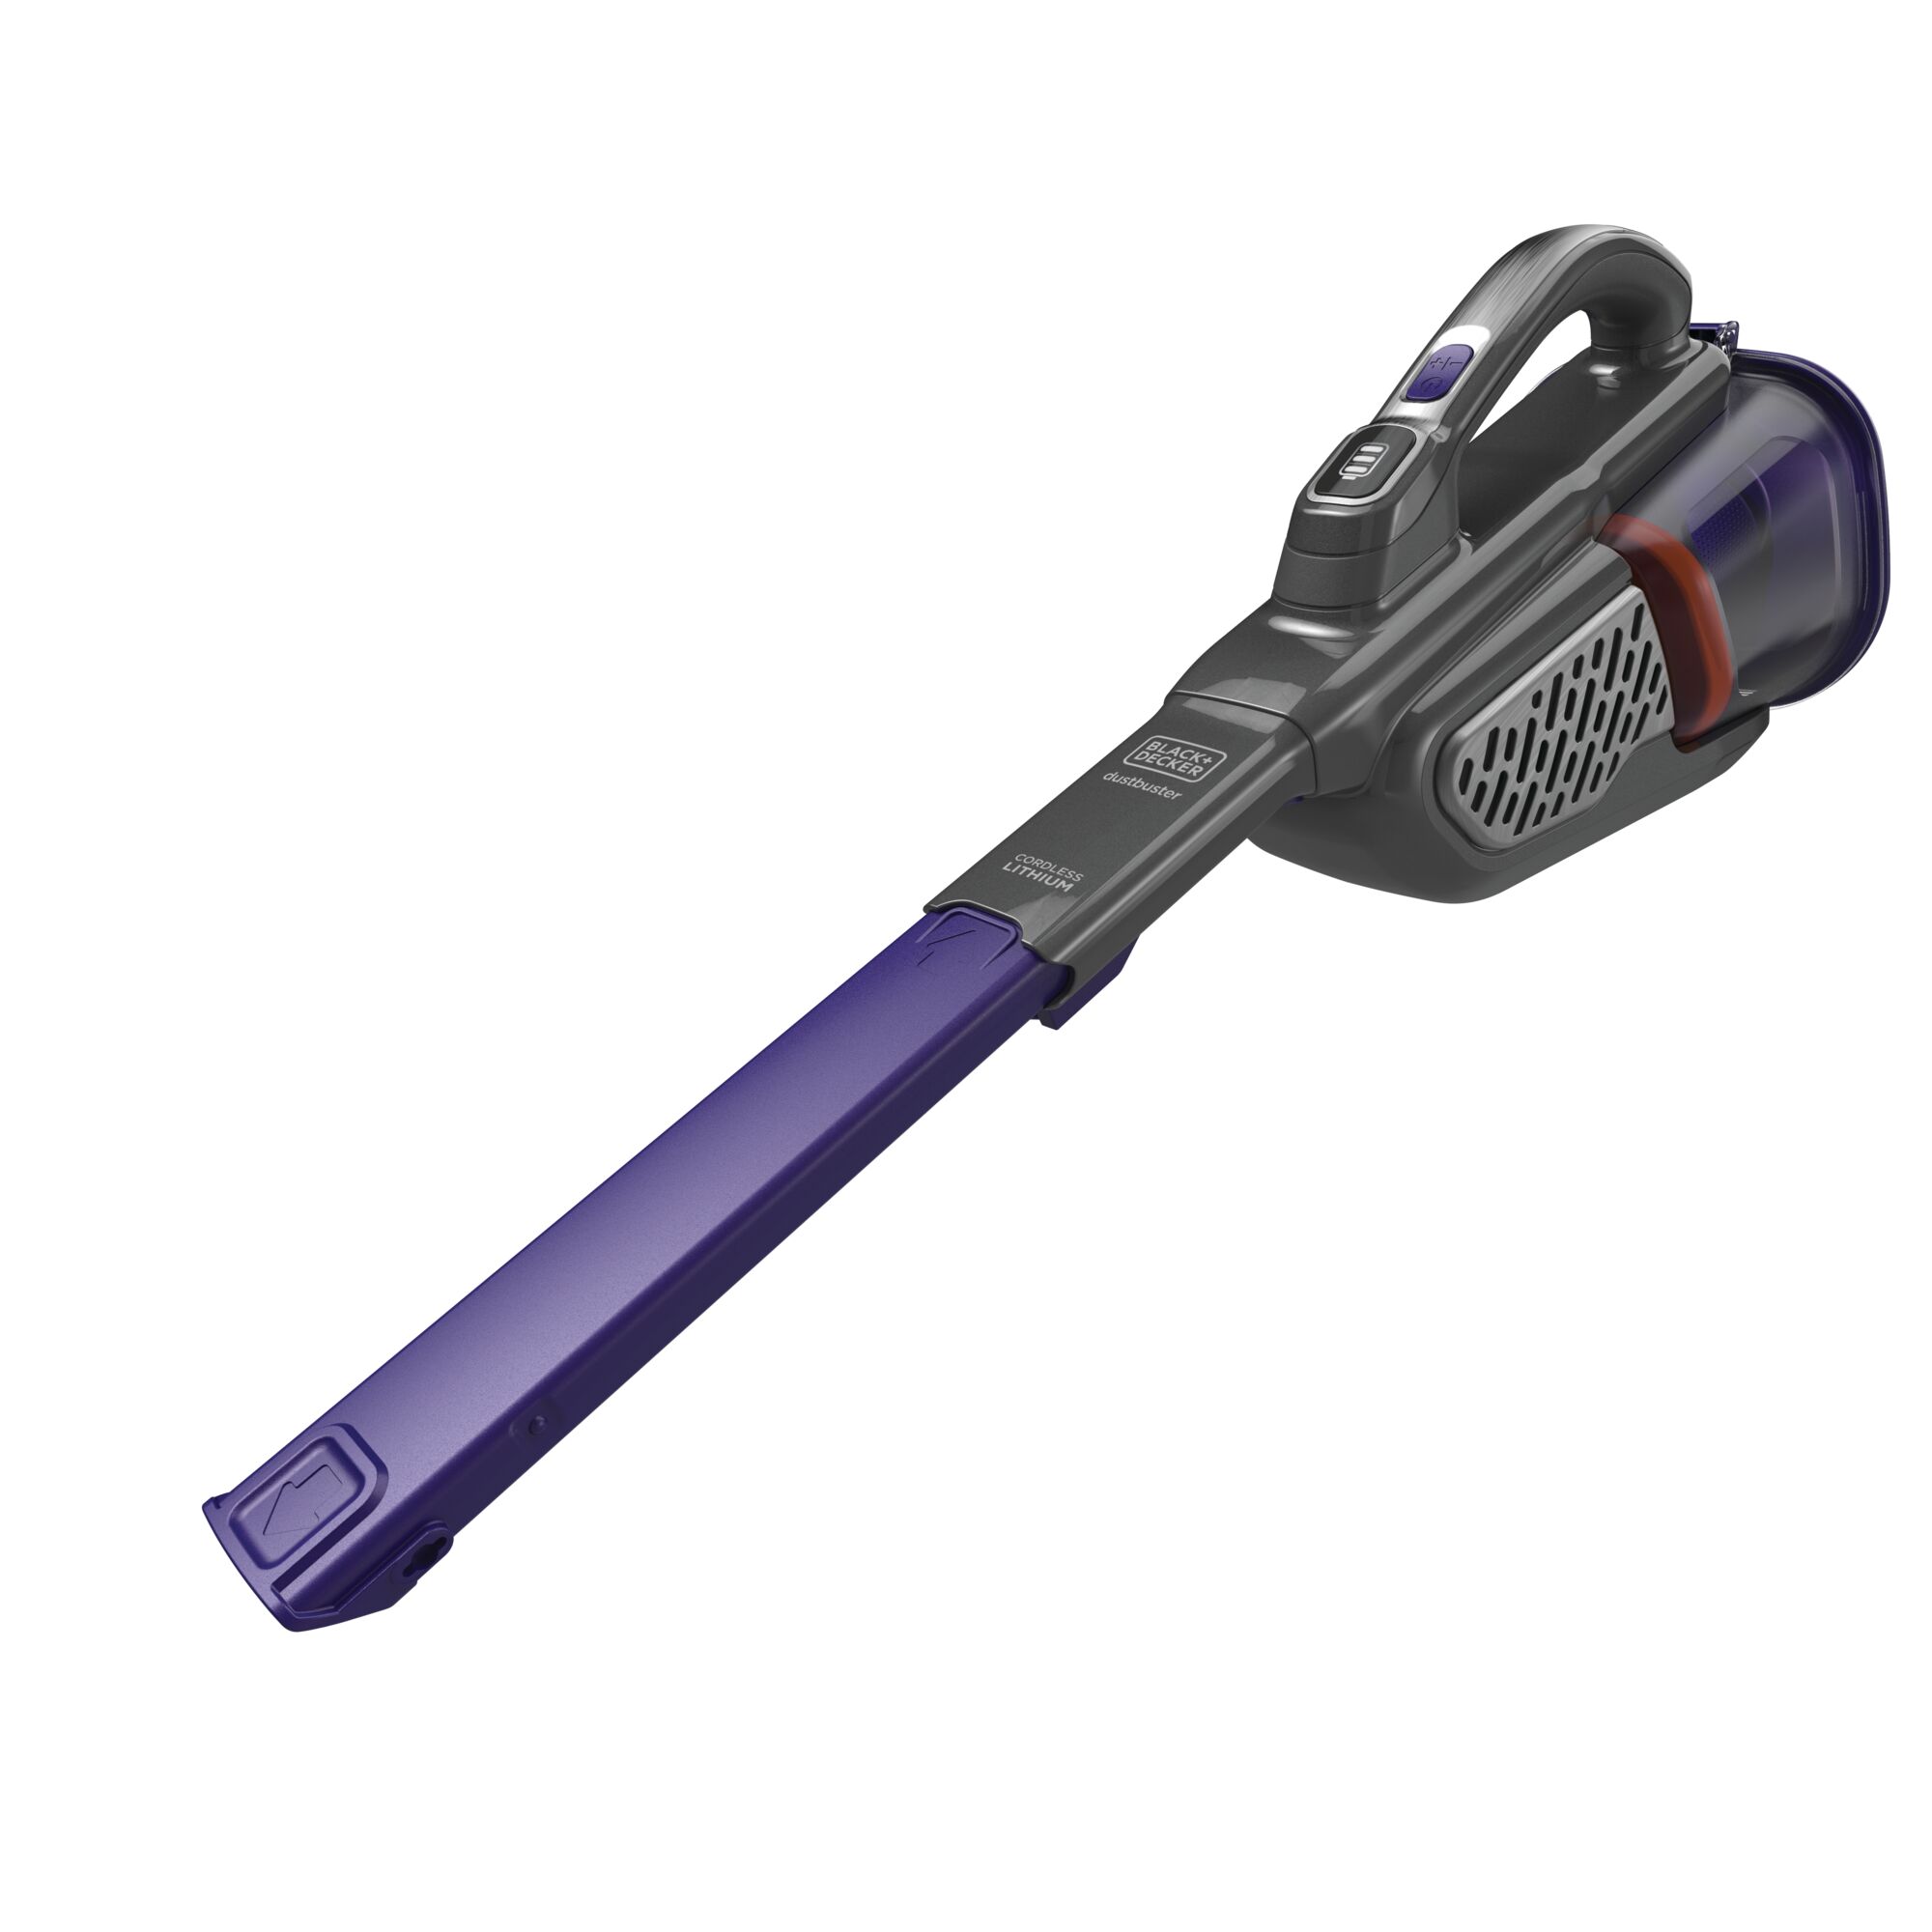 Profile of 20 volt max dustbuster advancedclean pet hand vacuum with base charger and extra filter.